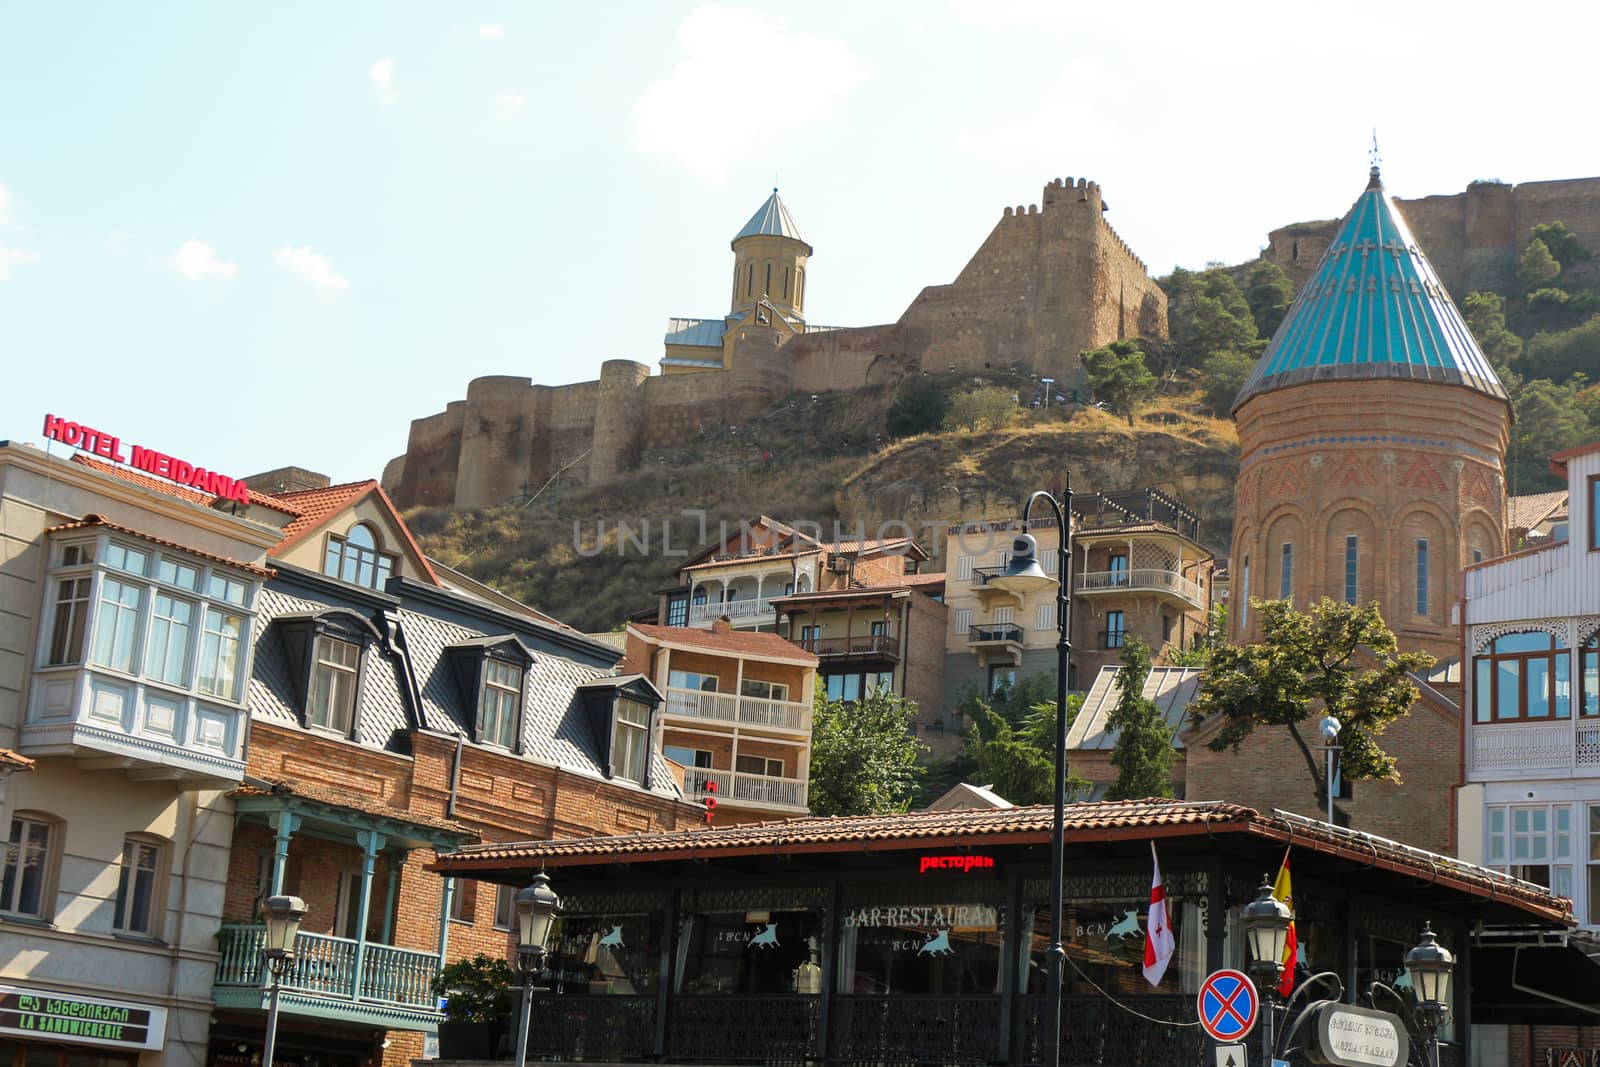 Tbilisi Old Town, of the capital of Georgia by berkay